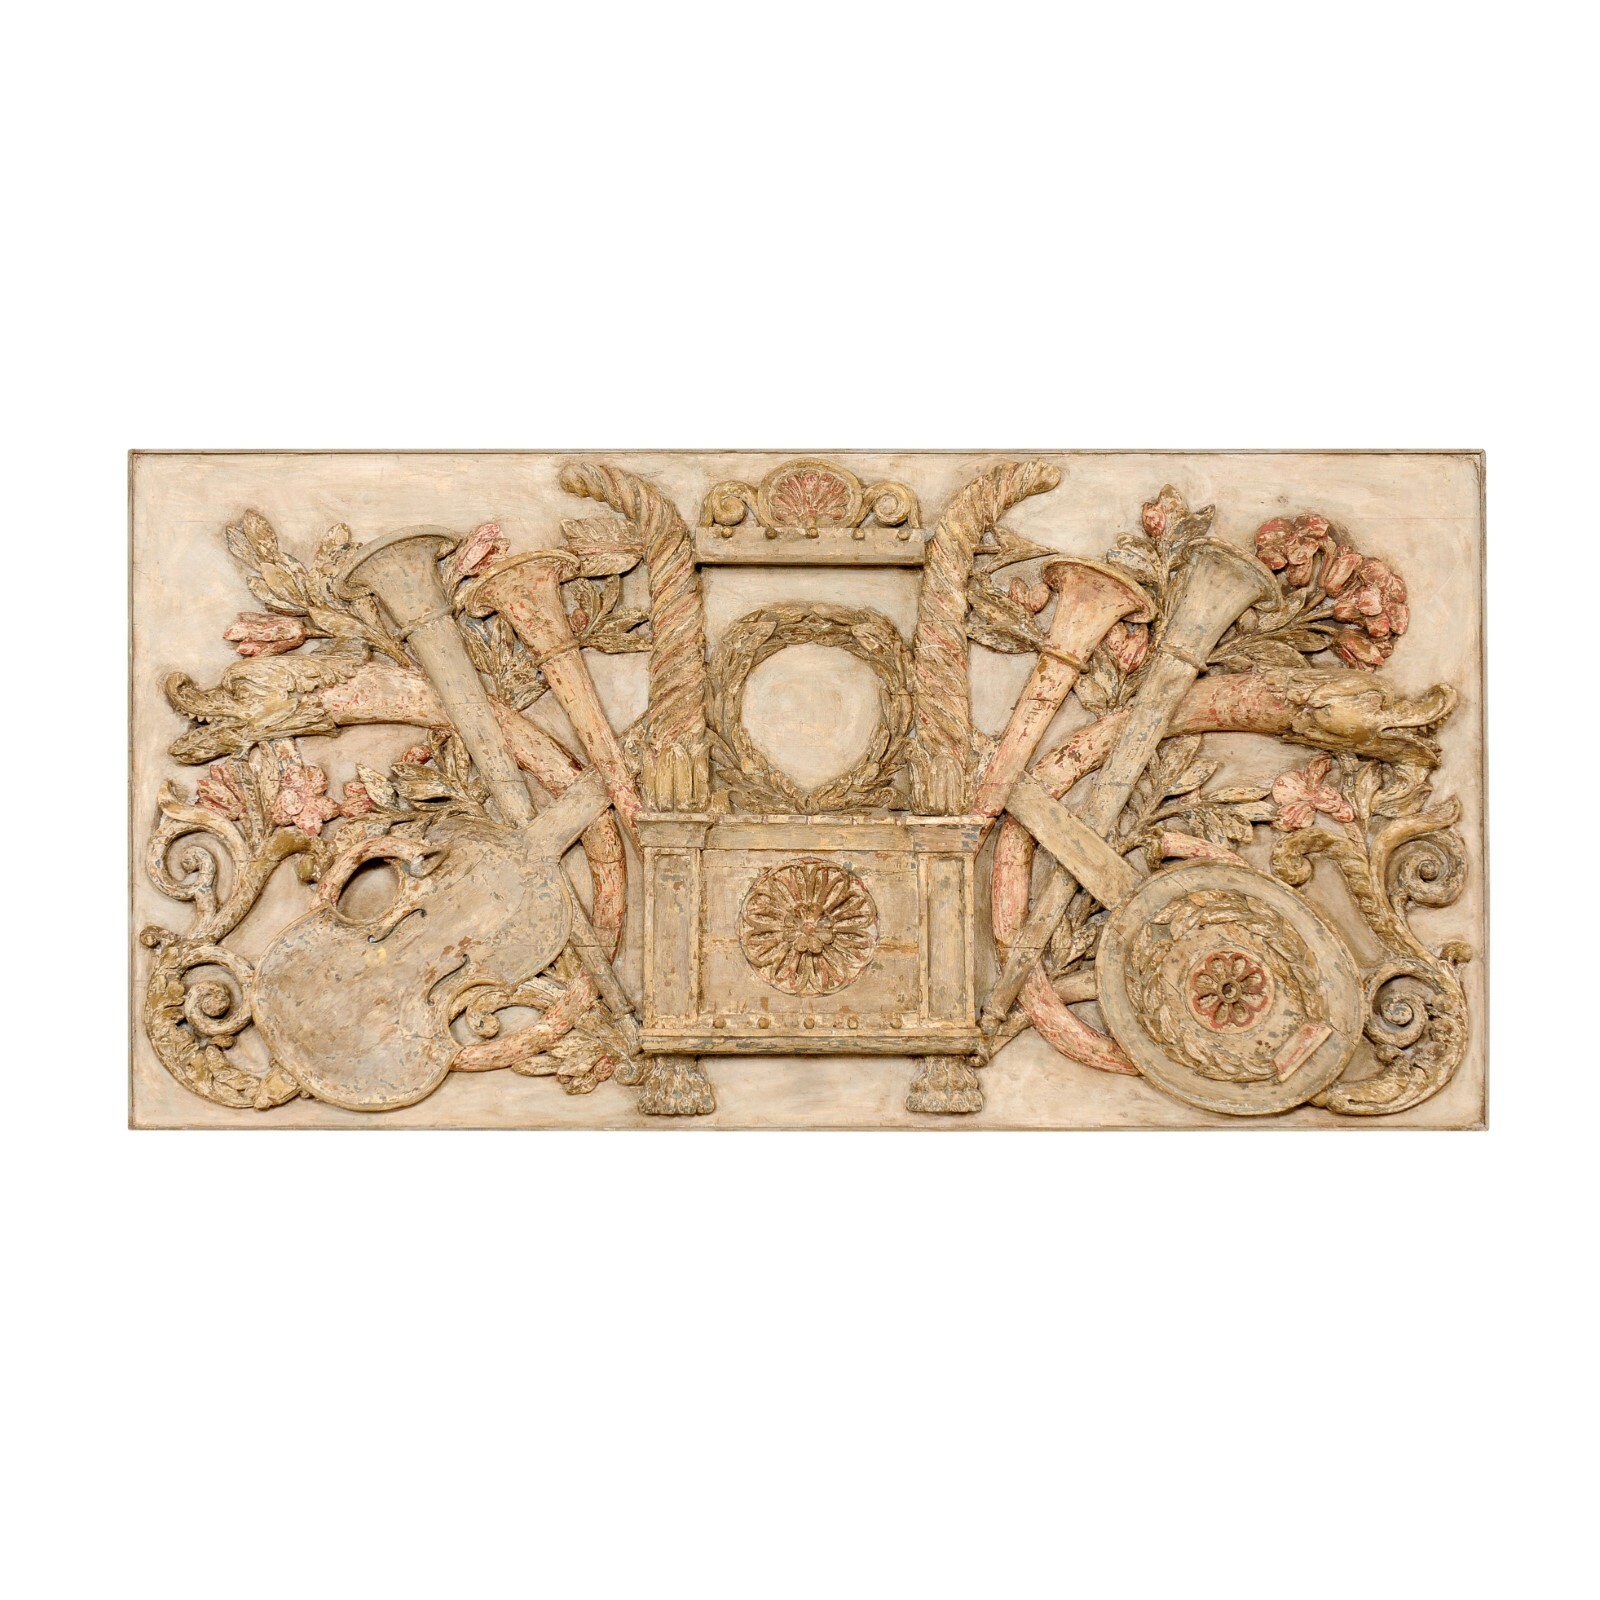 French Late 18th C. Musical Motif Plaque